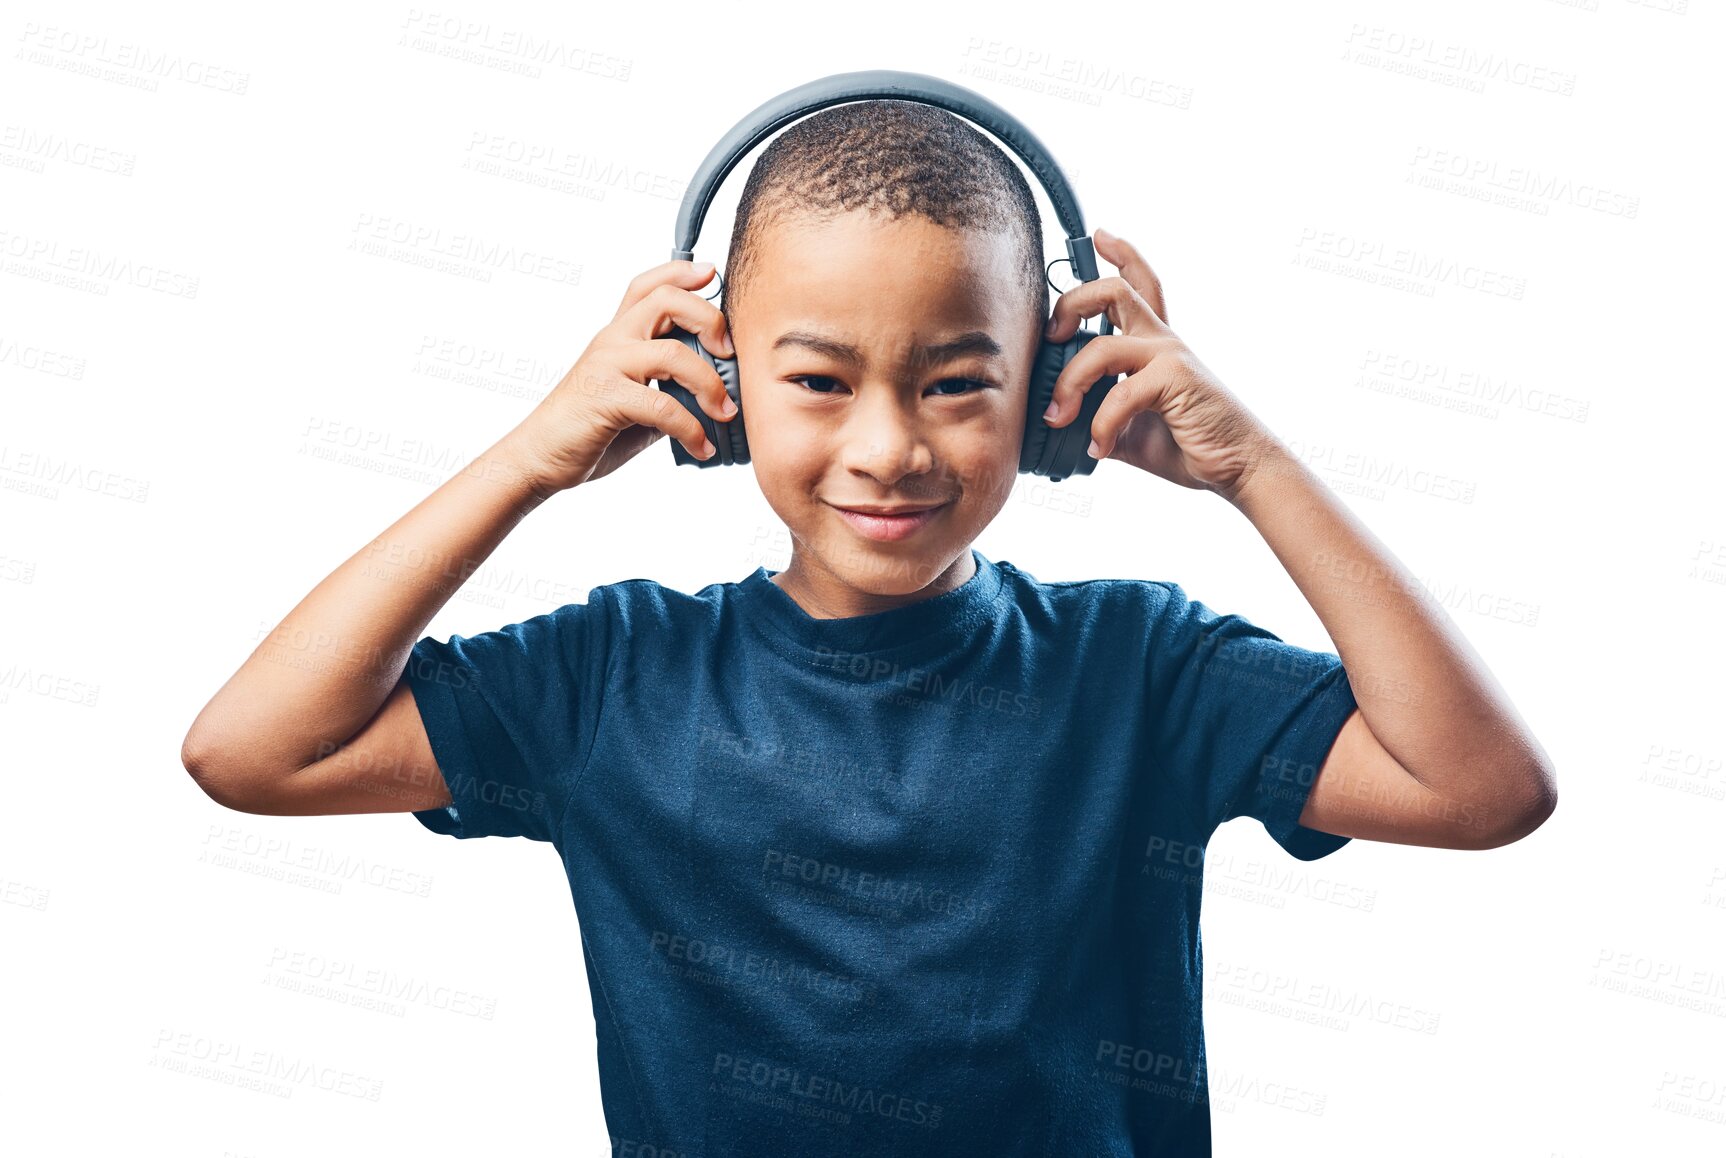 Buy stock photo Happy boy, portrait and headphones listening to music standing isolated on a transparent PNG background. Face of child, kid or little teen smiling with headset for audio, sound or song playlist